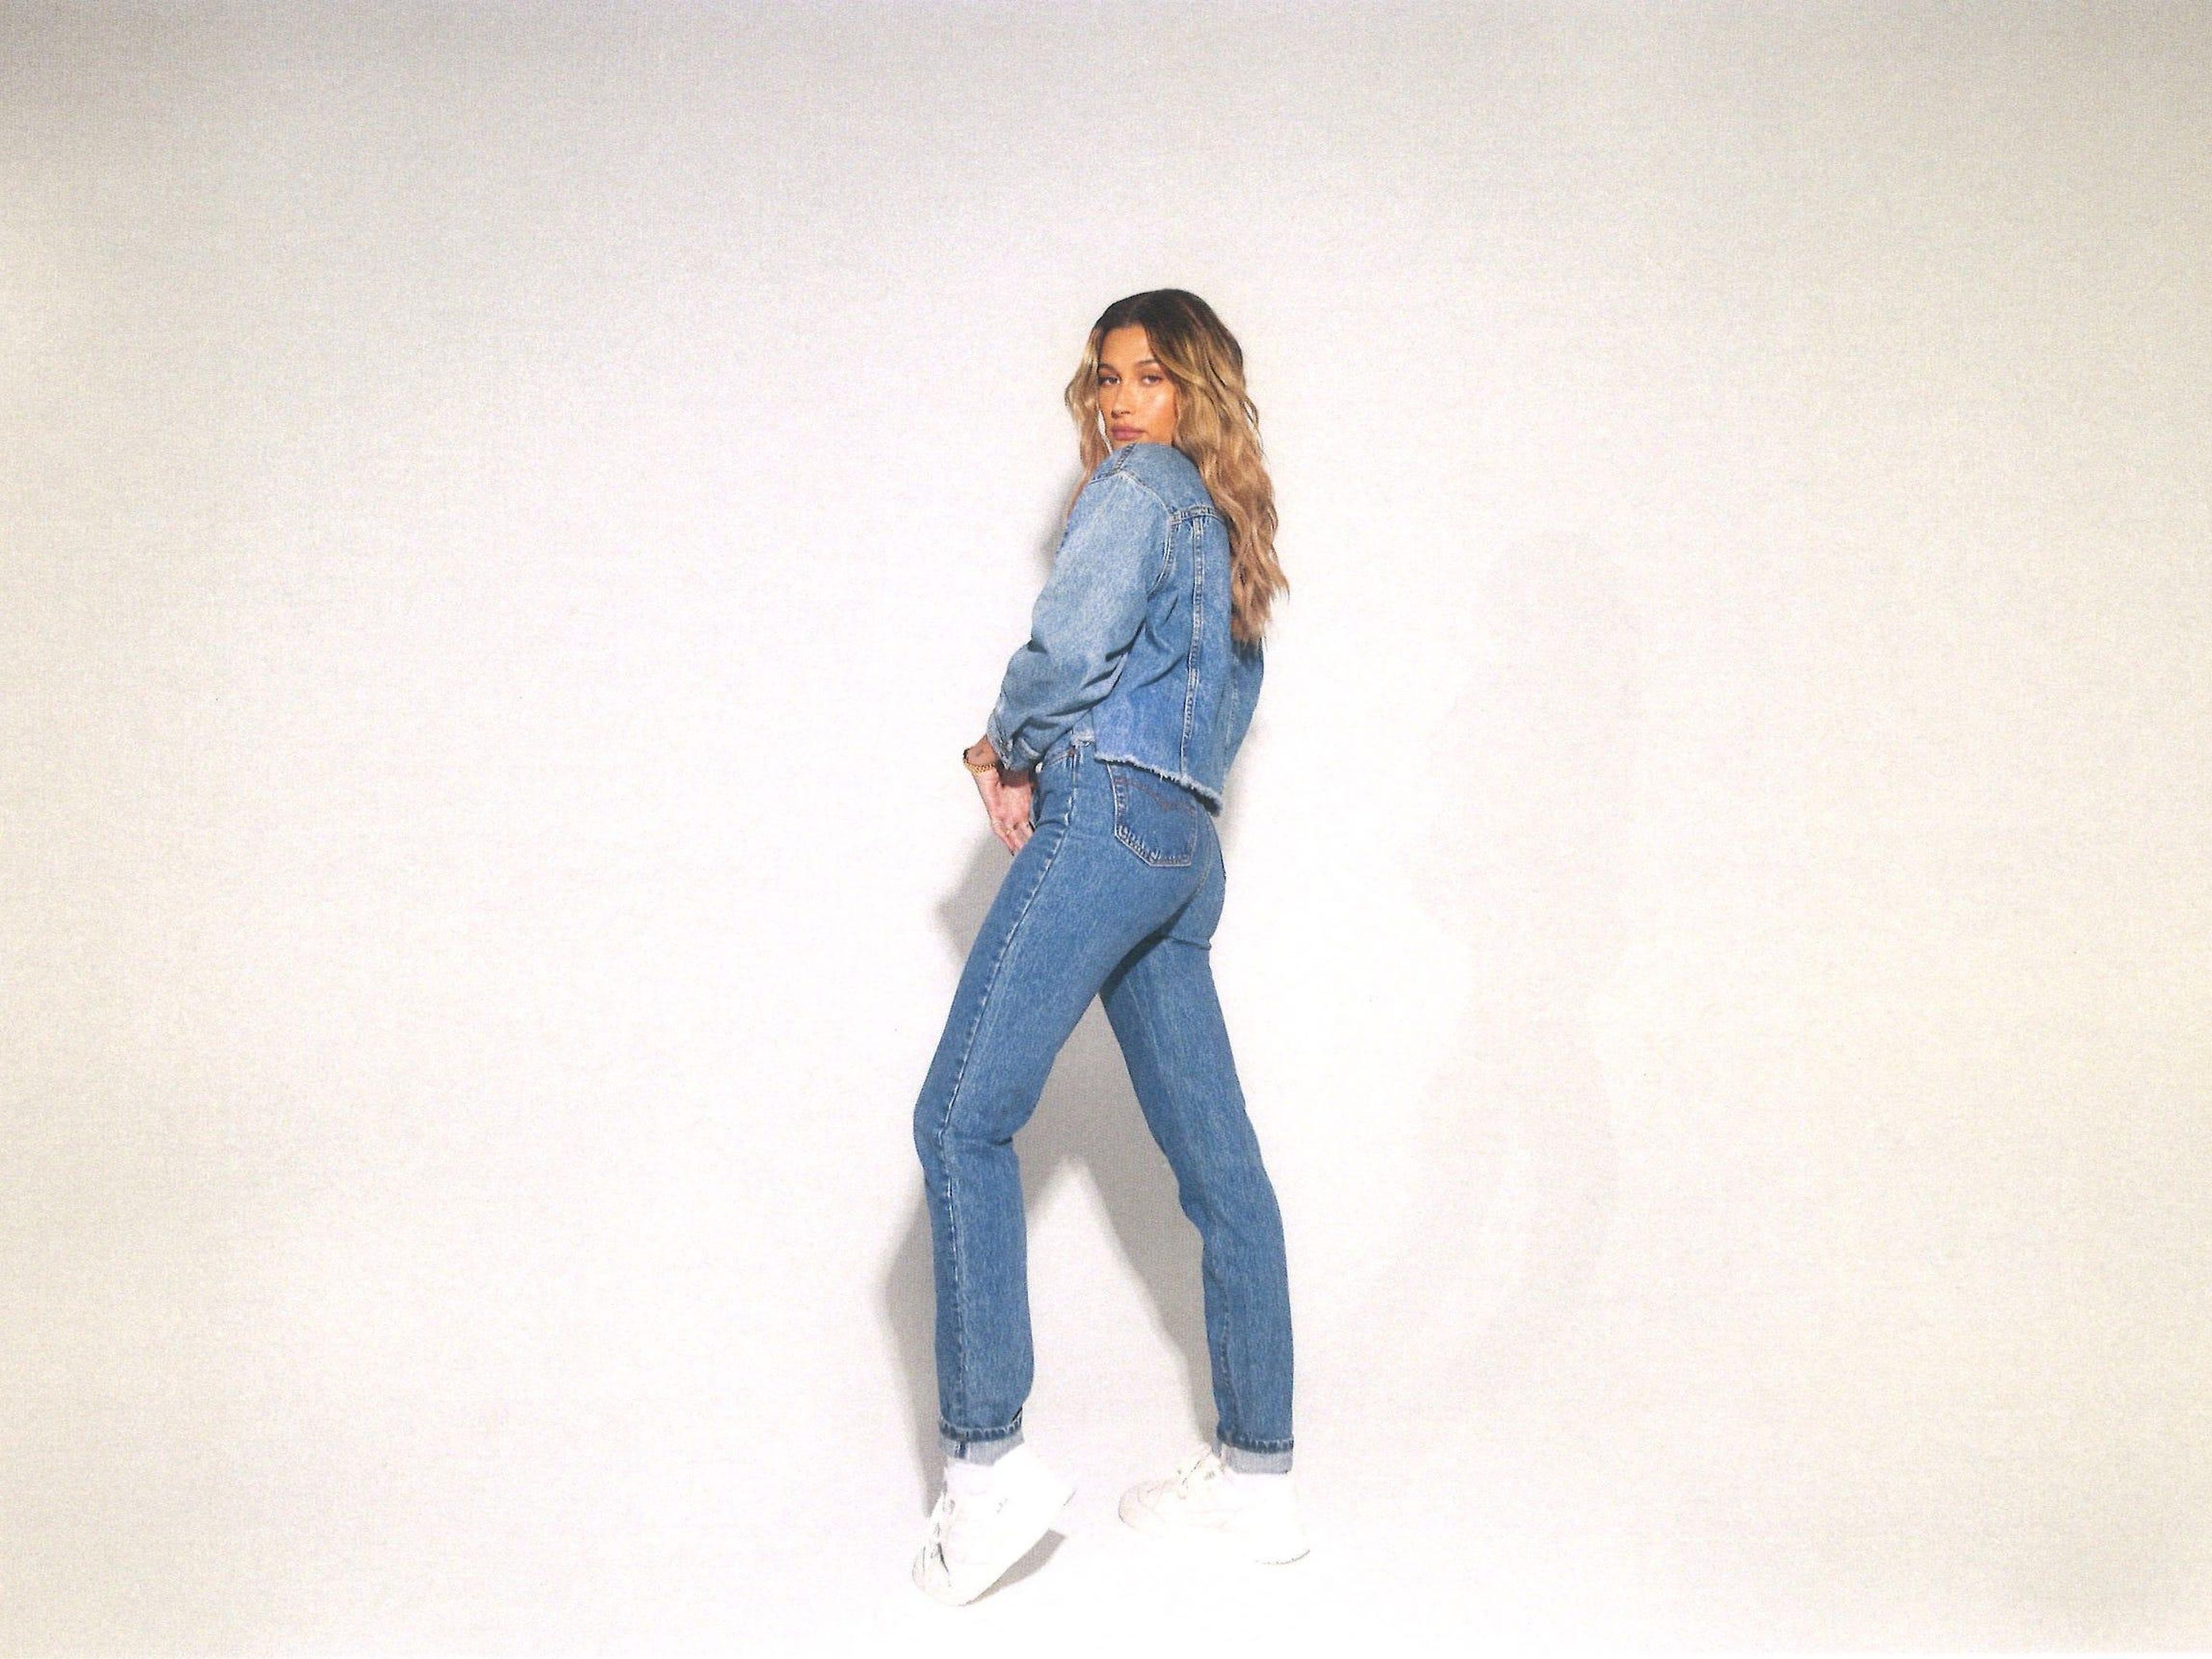 Hailey Bieber is starring in a campaign for Levi's new resale program. Levi's